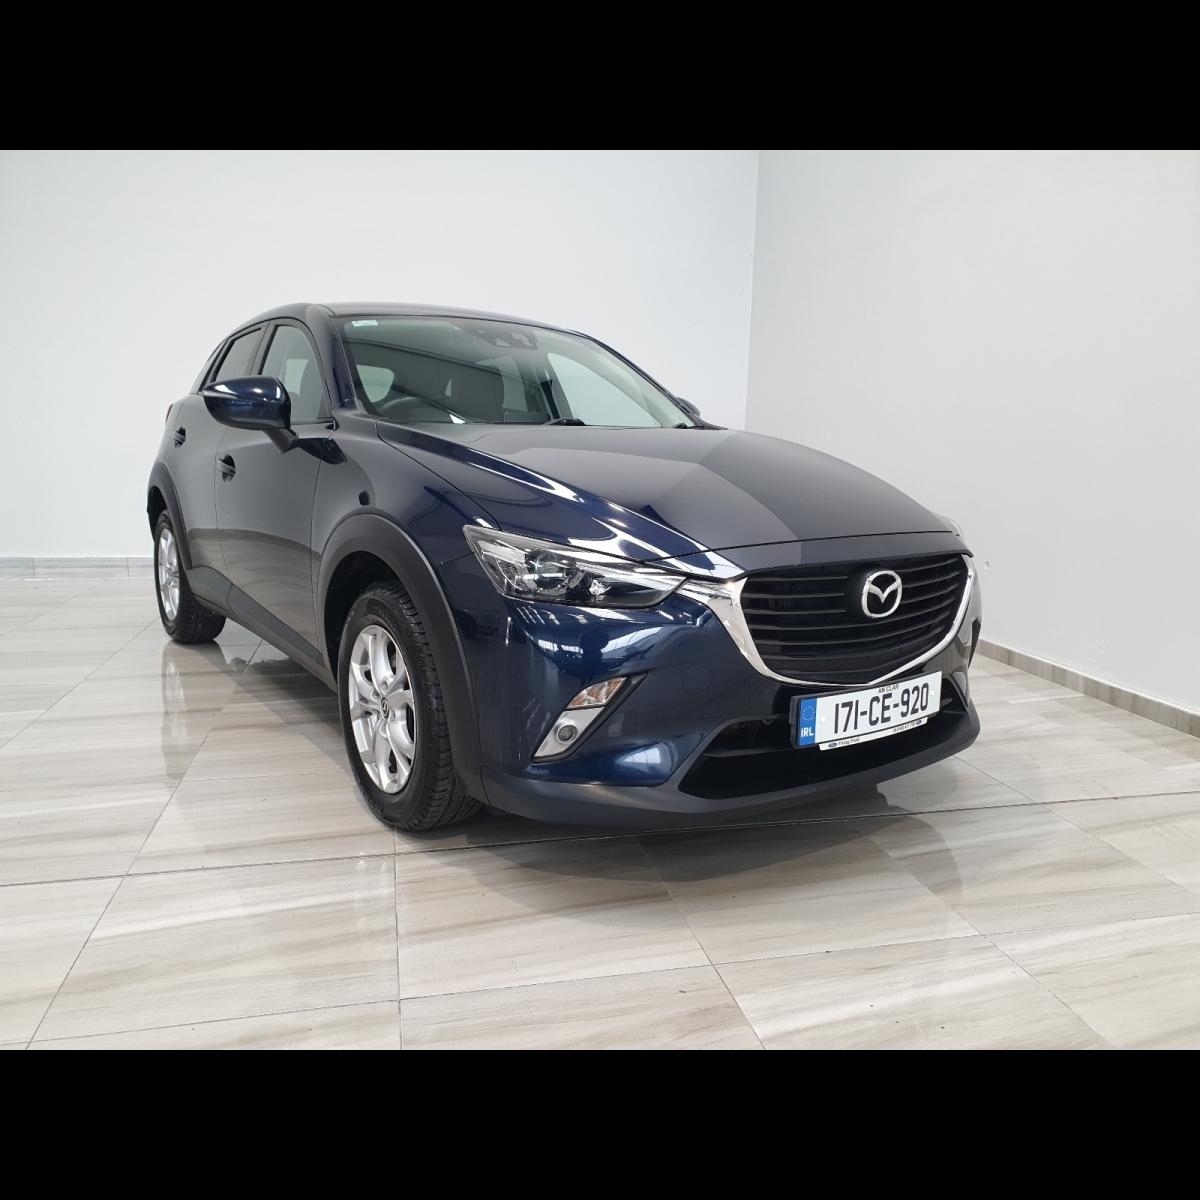 Discover the 2017 Mazda CX-3 at Finlay Motor Group in Naas, Co Kildare